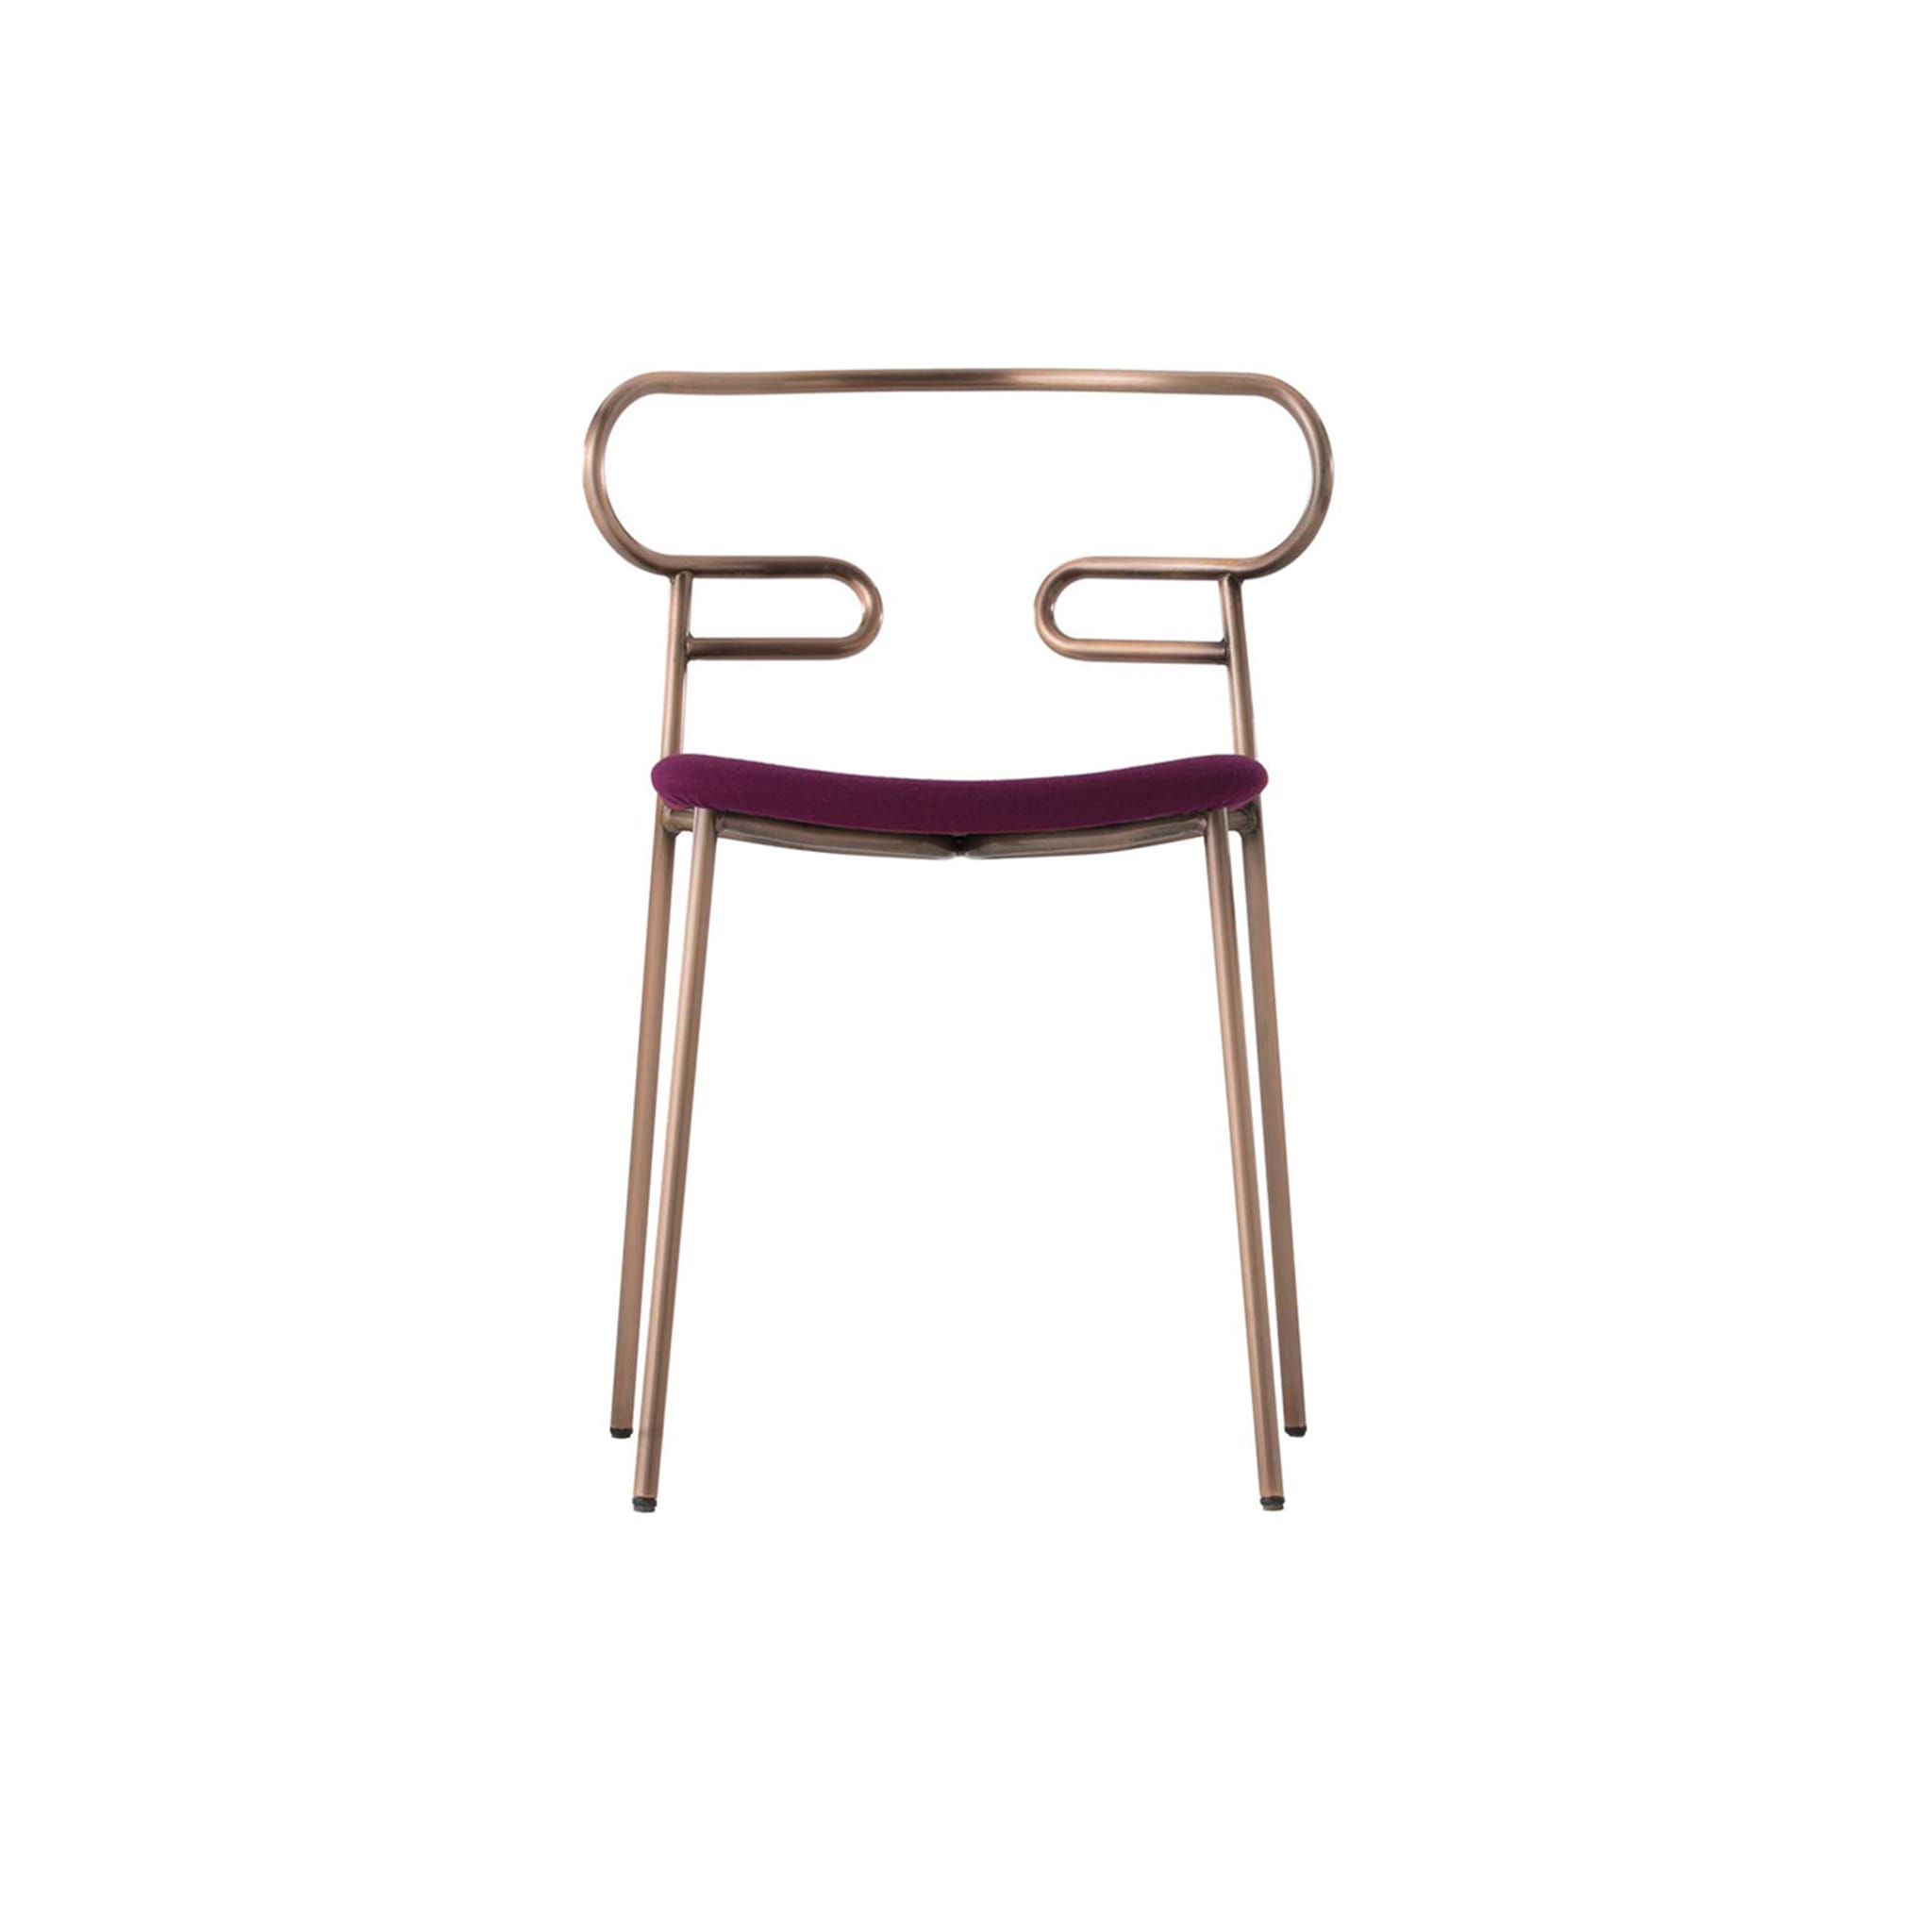 Genoa Copper and Burgundy Chair by Cesare Ehr - Main view